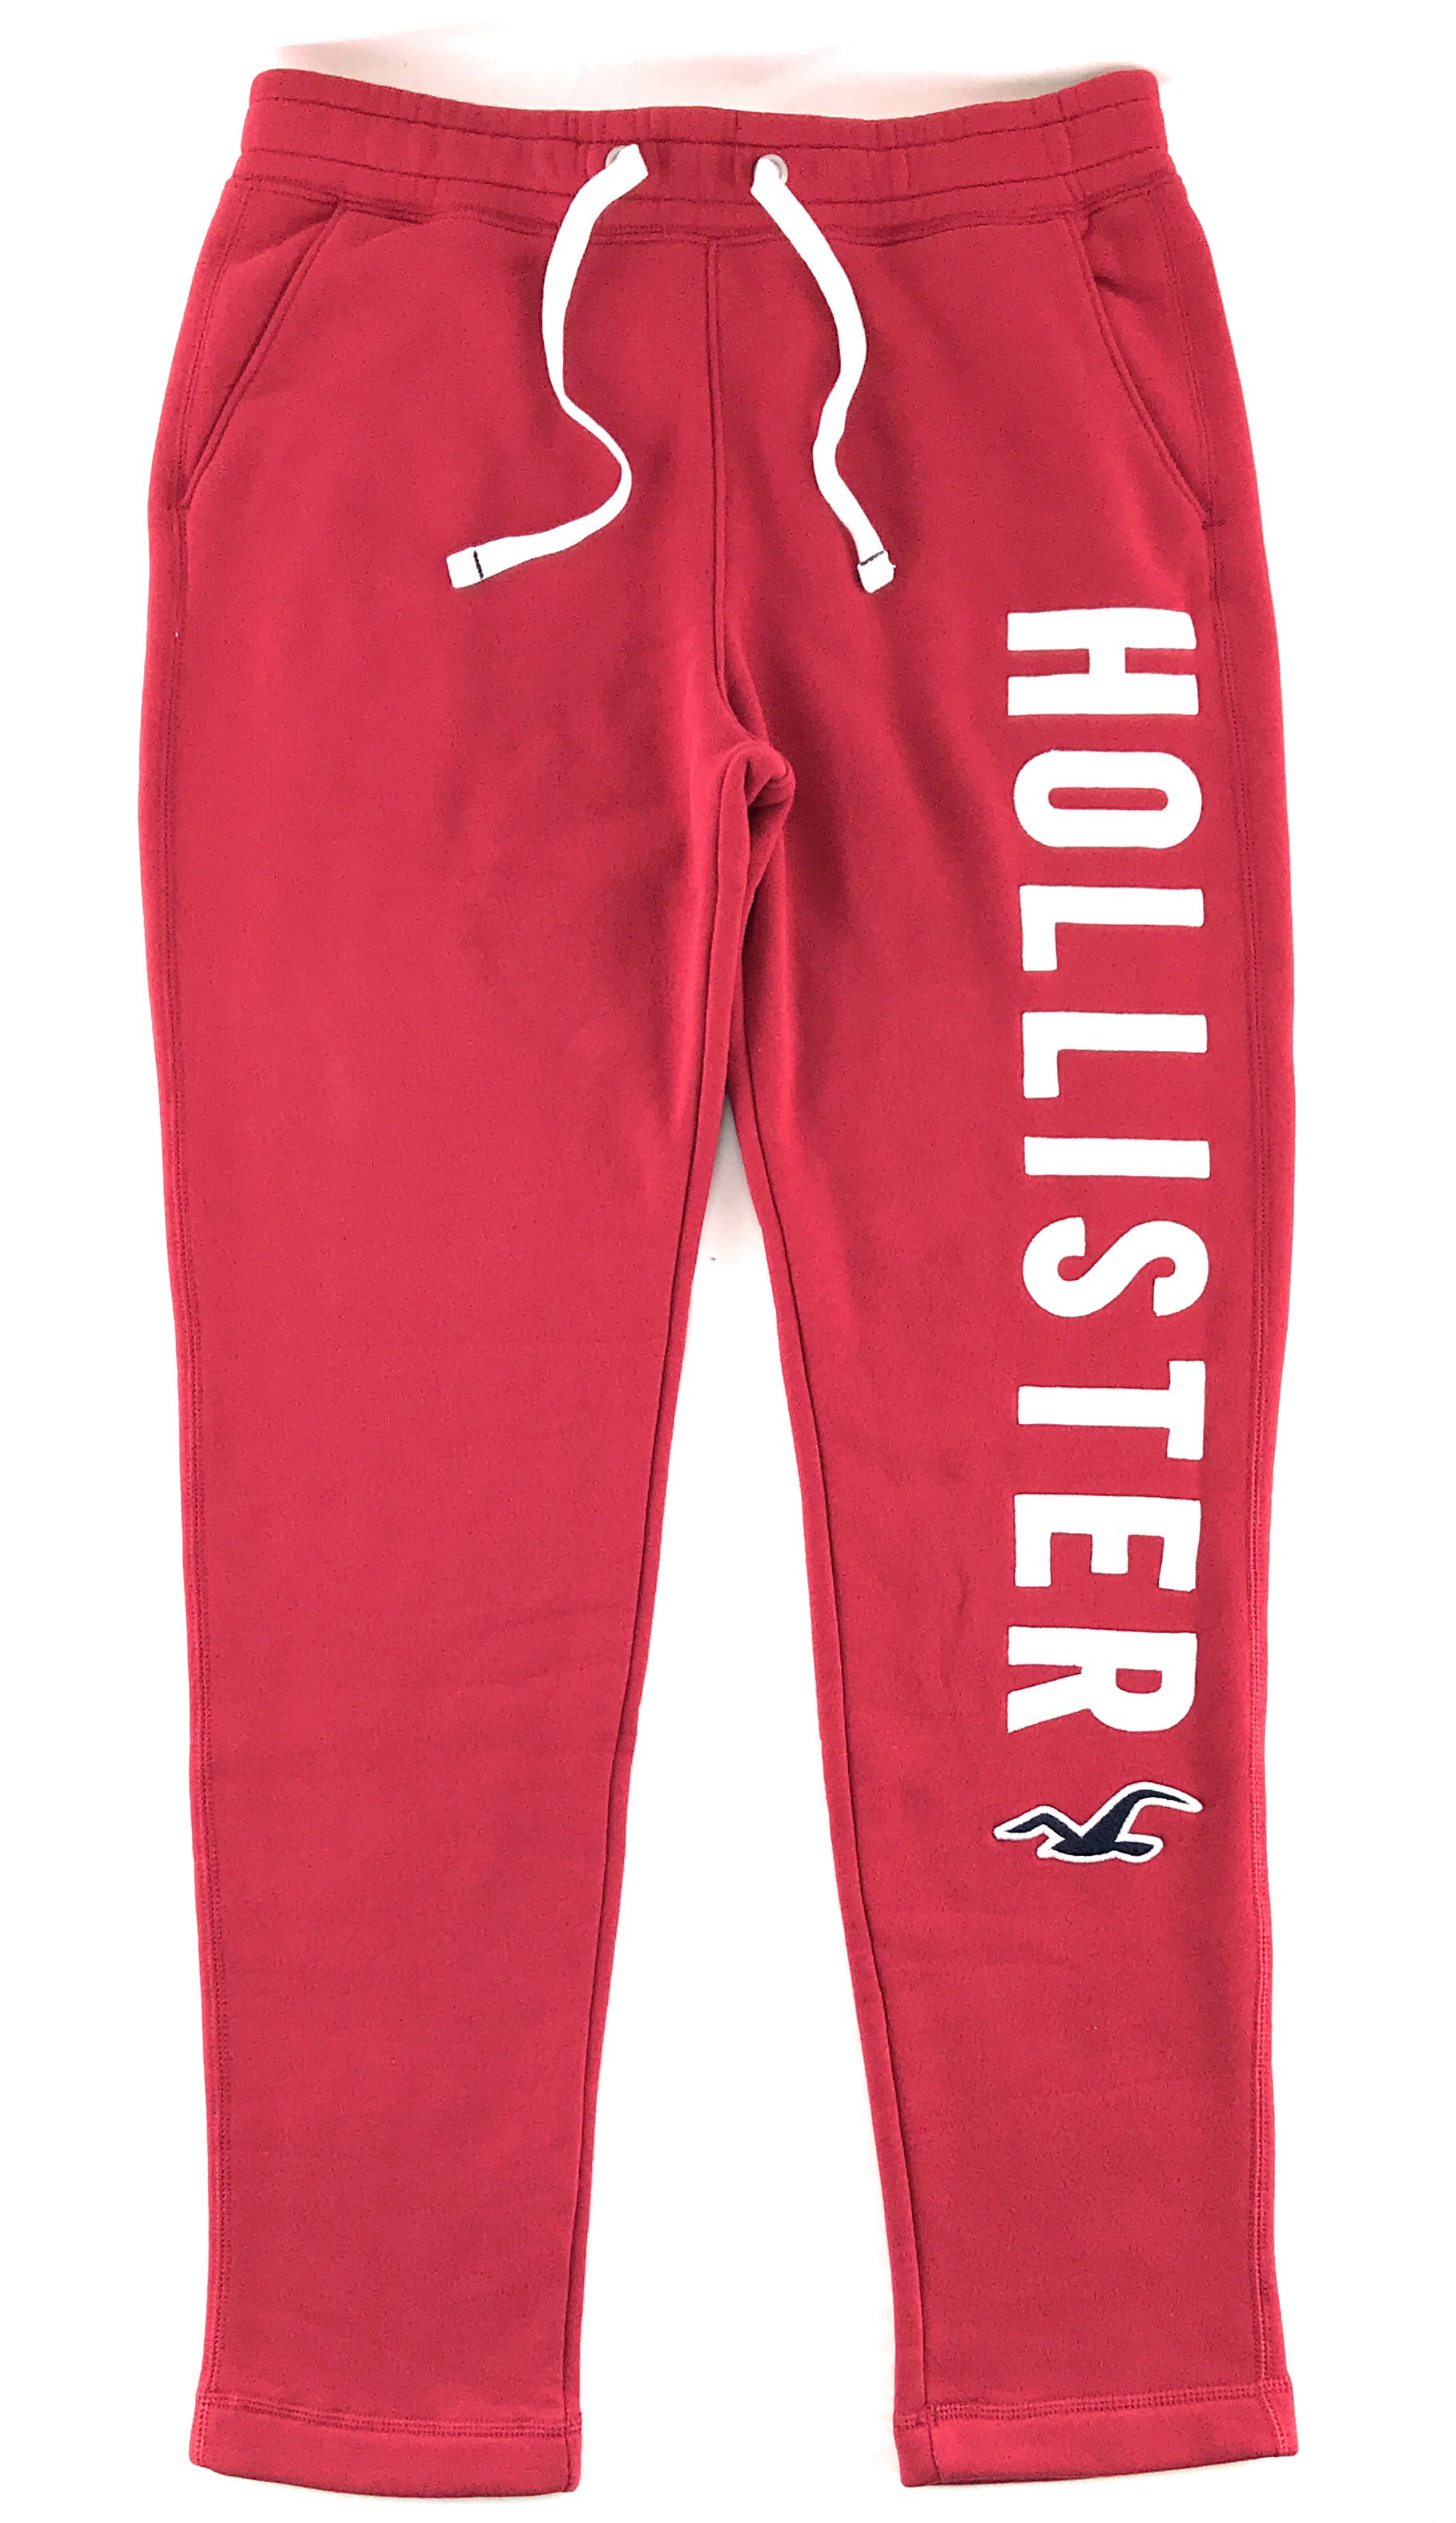 Hollister Sweatpants Cherry Apple Red Joggers Elastic Waist Pockets Comfy  Small 